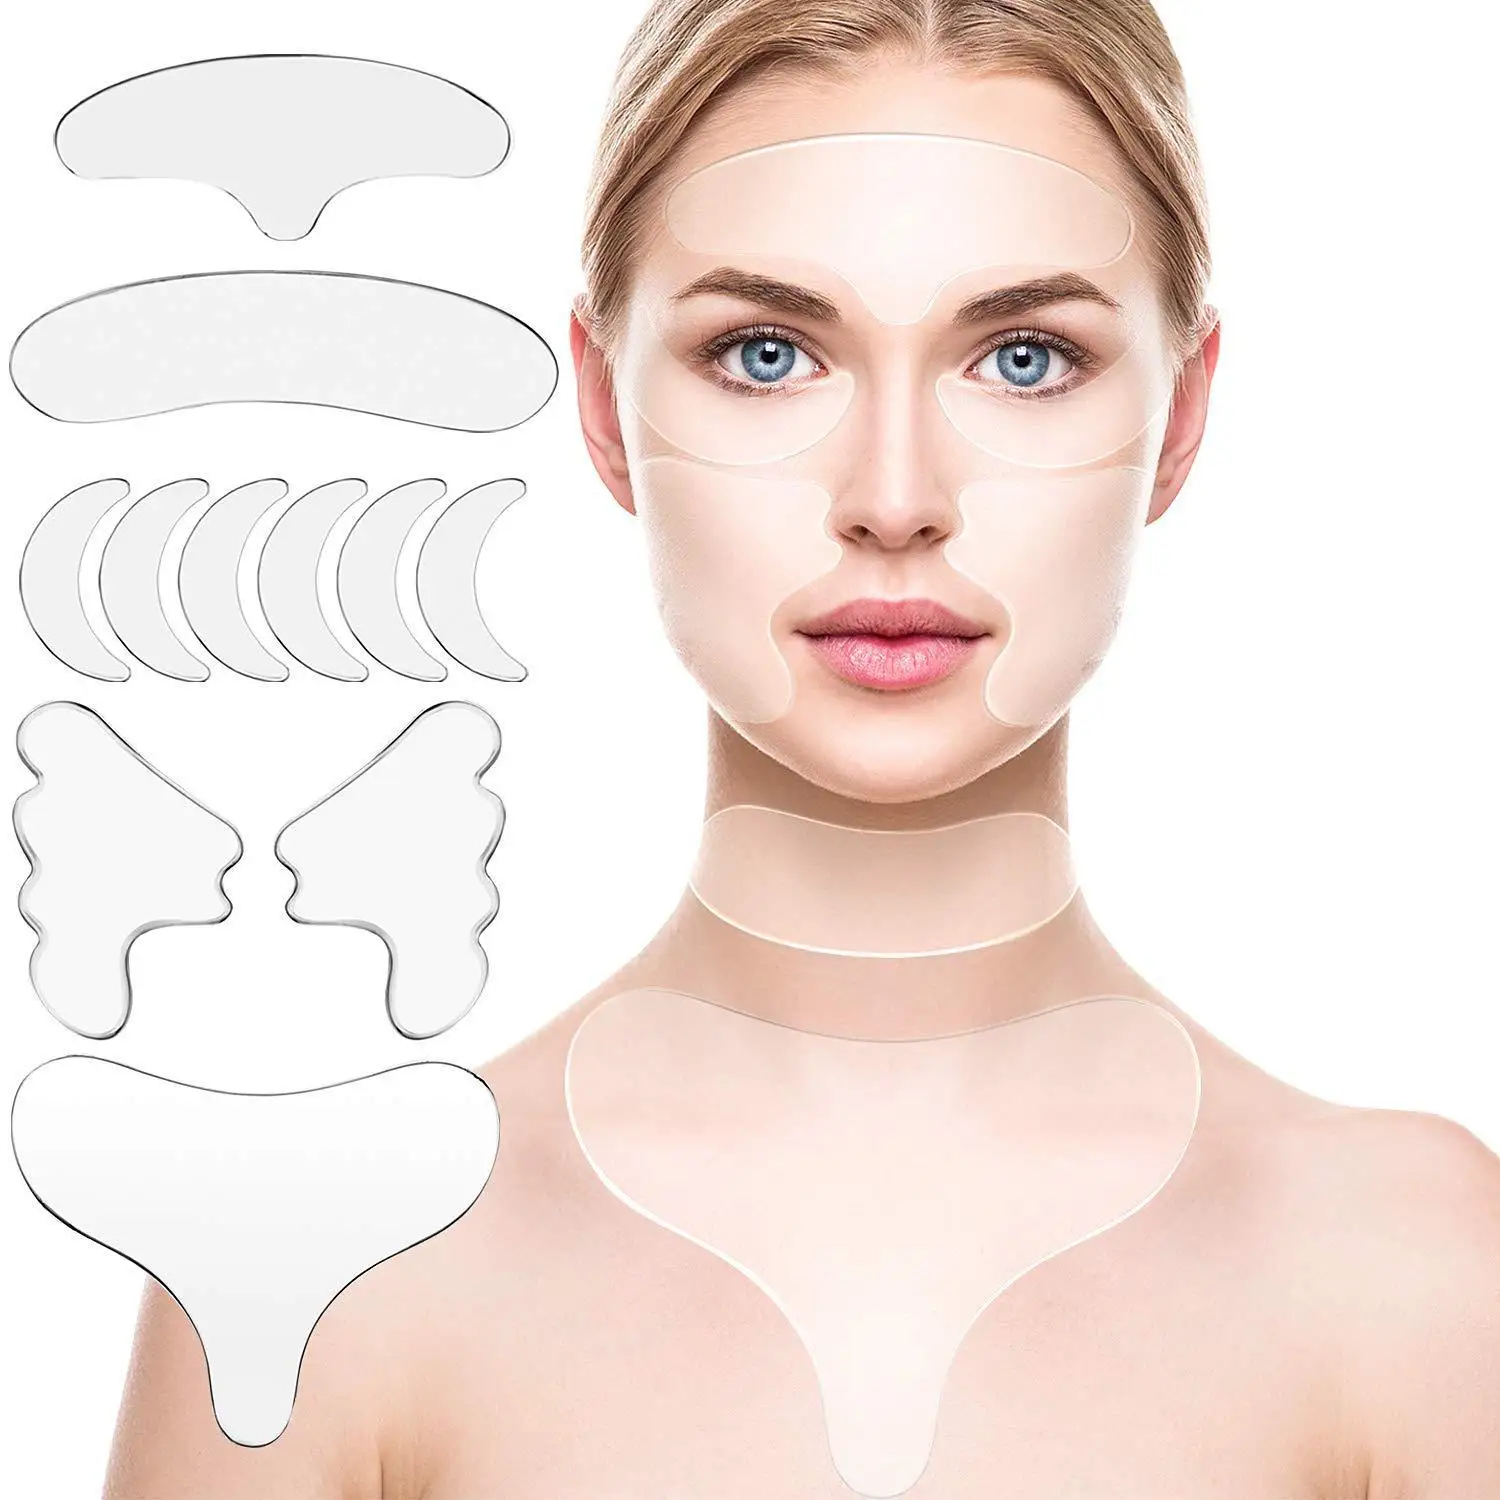 Silicone Anti-wrinkle Patch Firming Wrinkle-removing Anti-wrinkle Beauty Patch Skin Care Sticker Pad Suit for Chest Face Neck